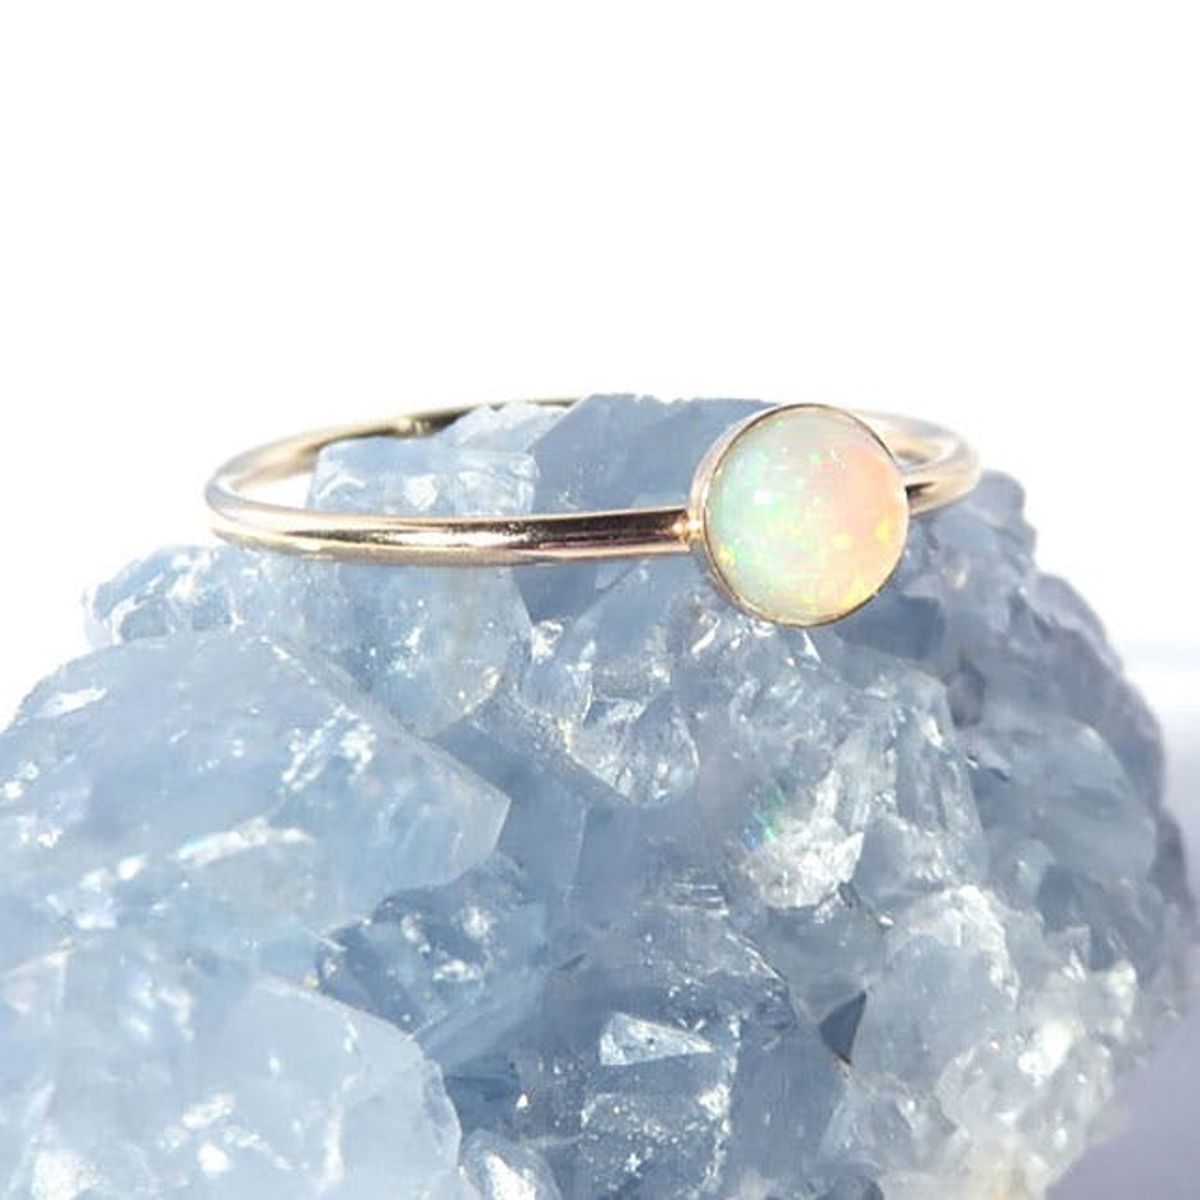 15 Stunning Opal Jewels You’ll Stare At All Day